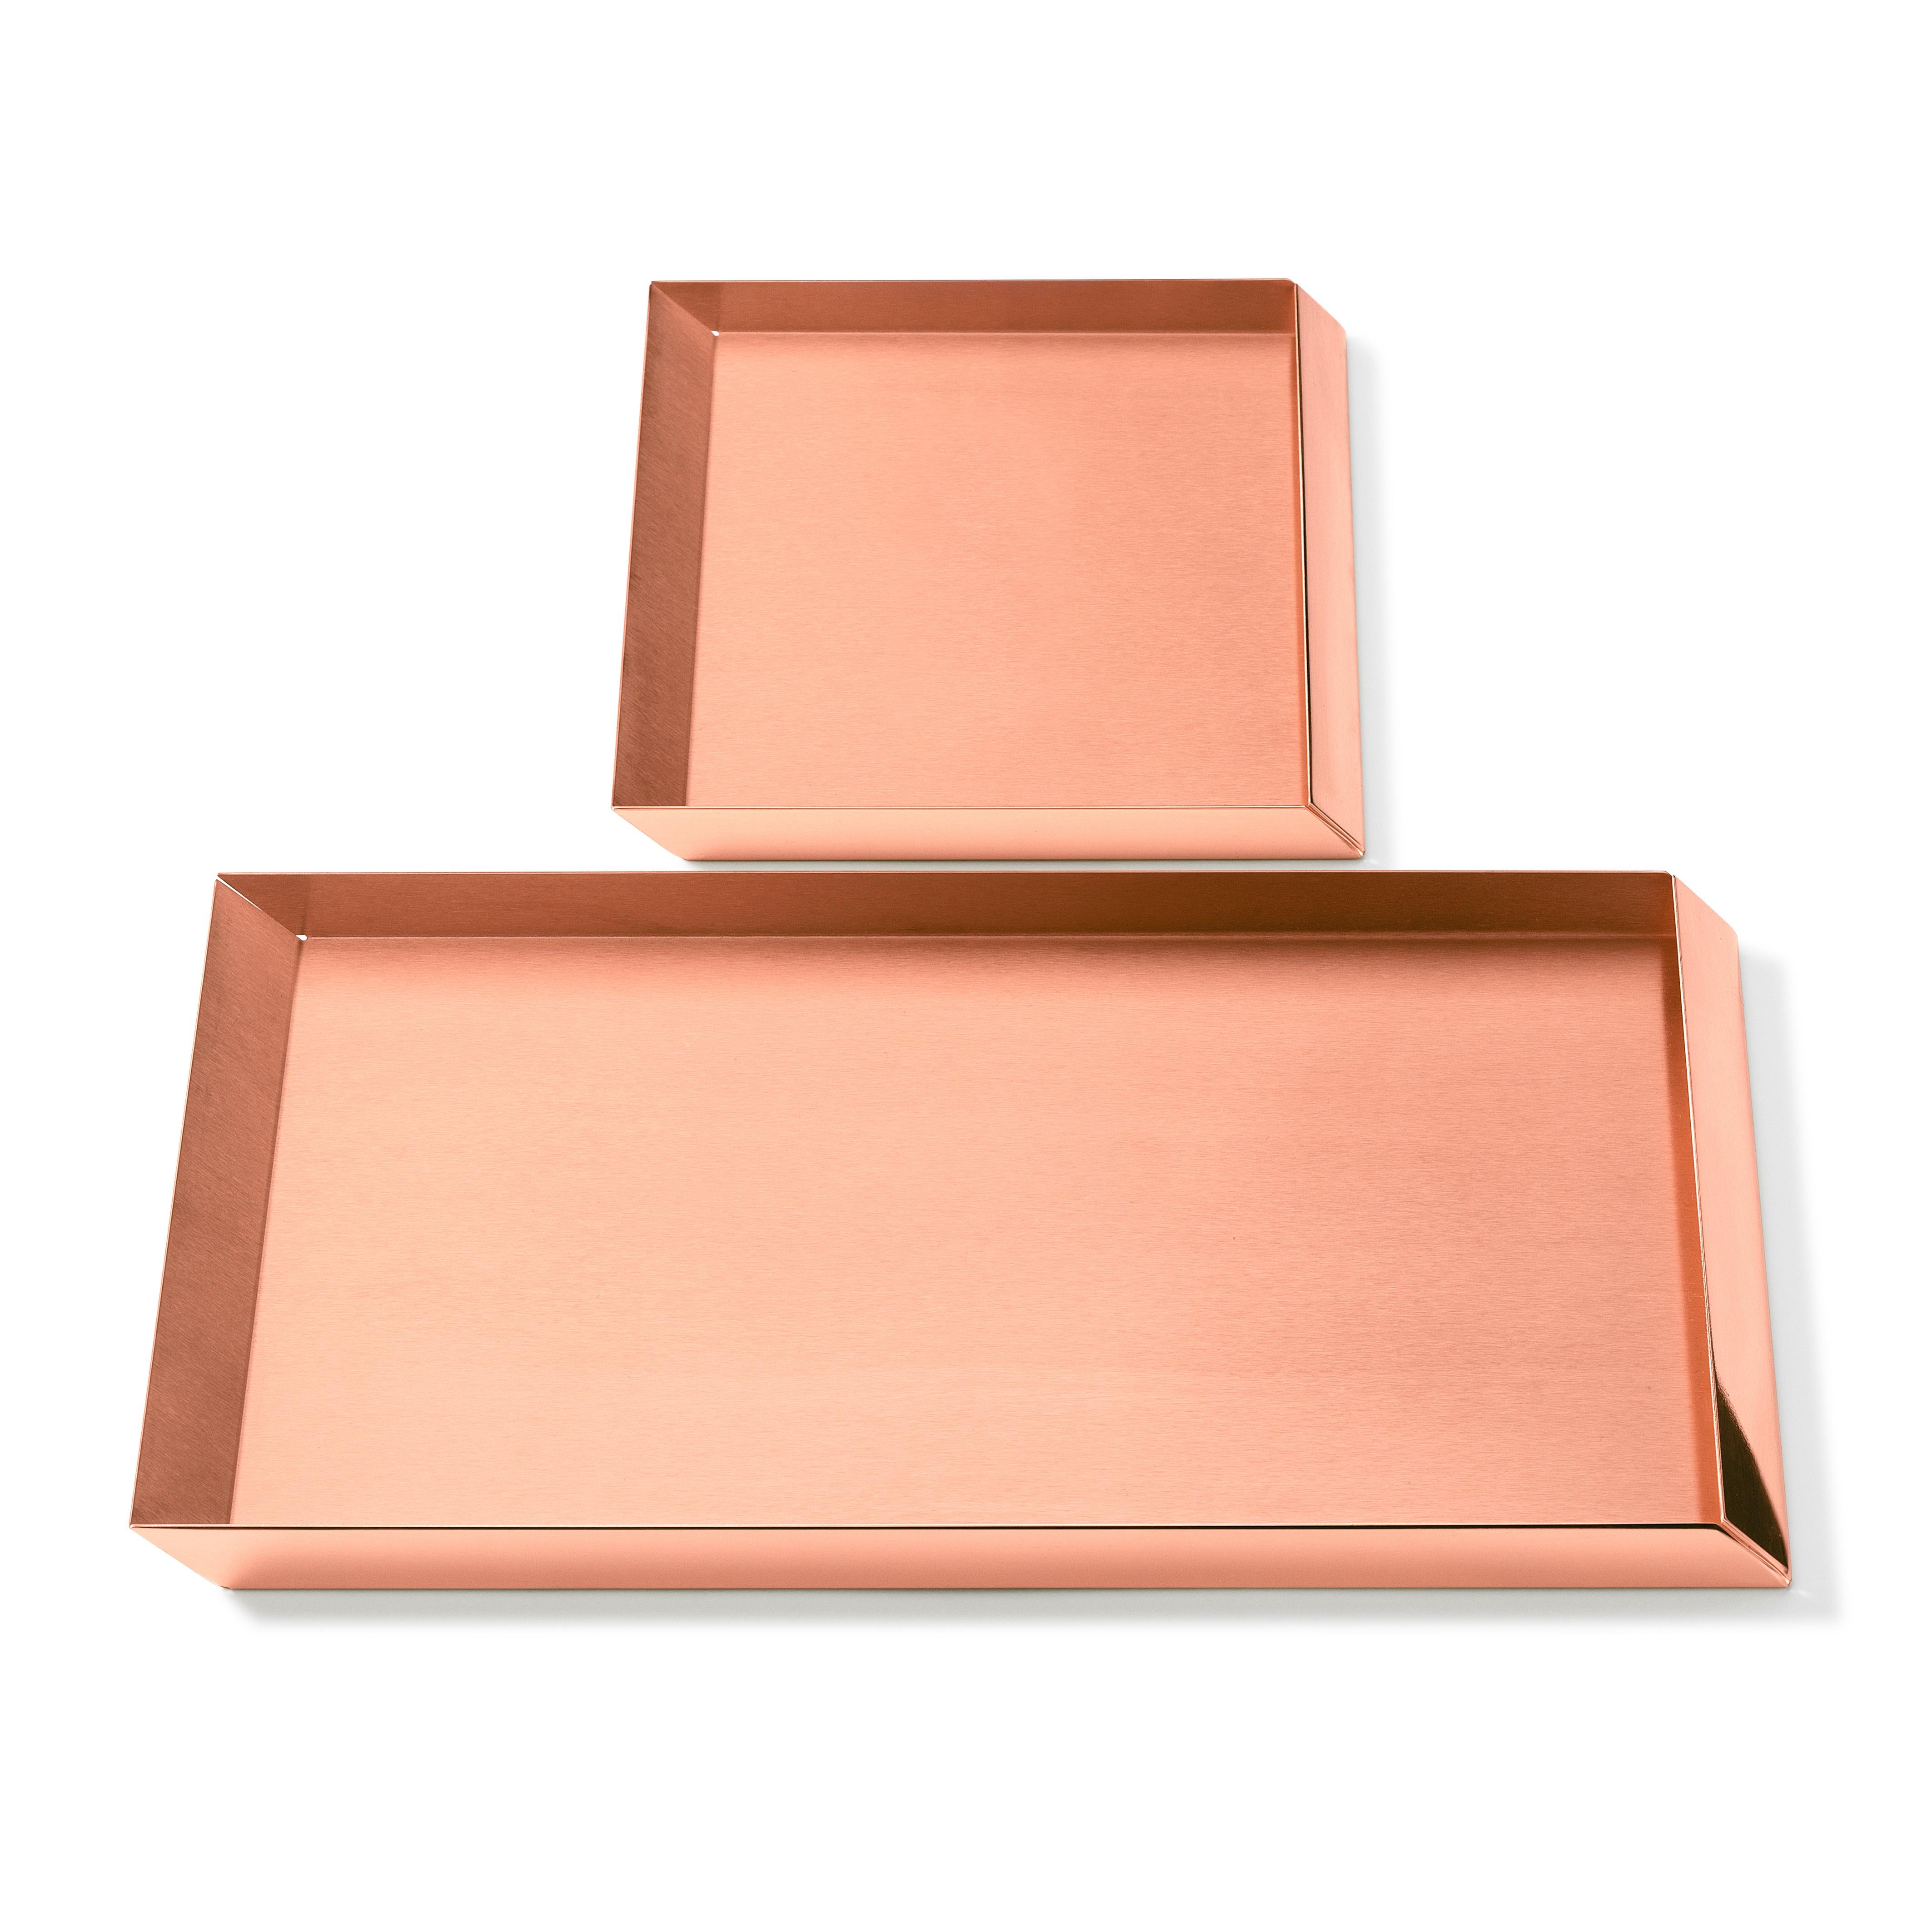 Axonometry squared small tray in copper by Elisa Giovanni.

Materials:
Copper
Net weight:
0.6 kg
Dimensions:
W 20 x D 20 x 2 H cm.